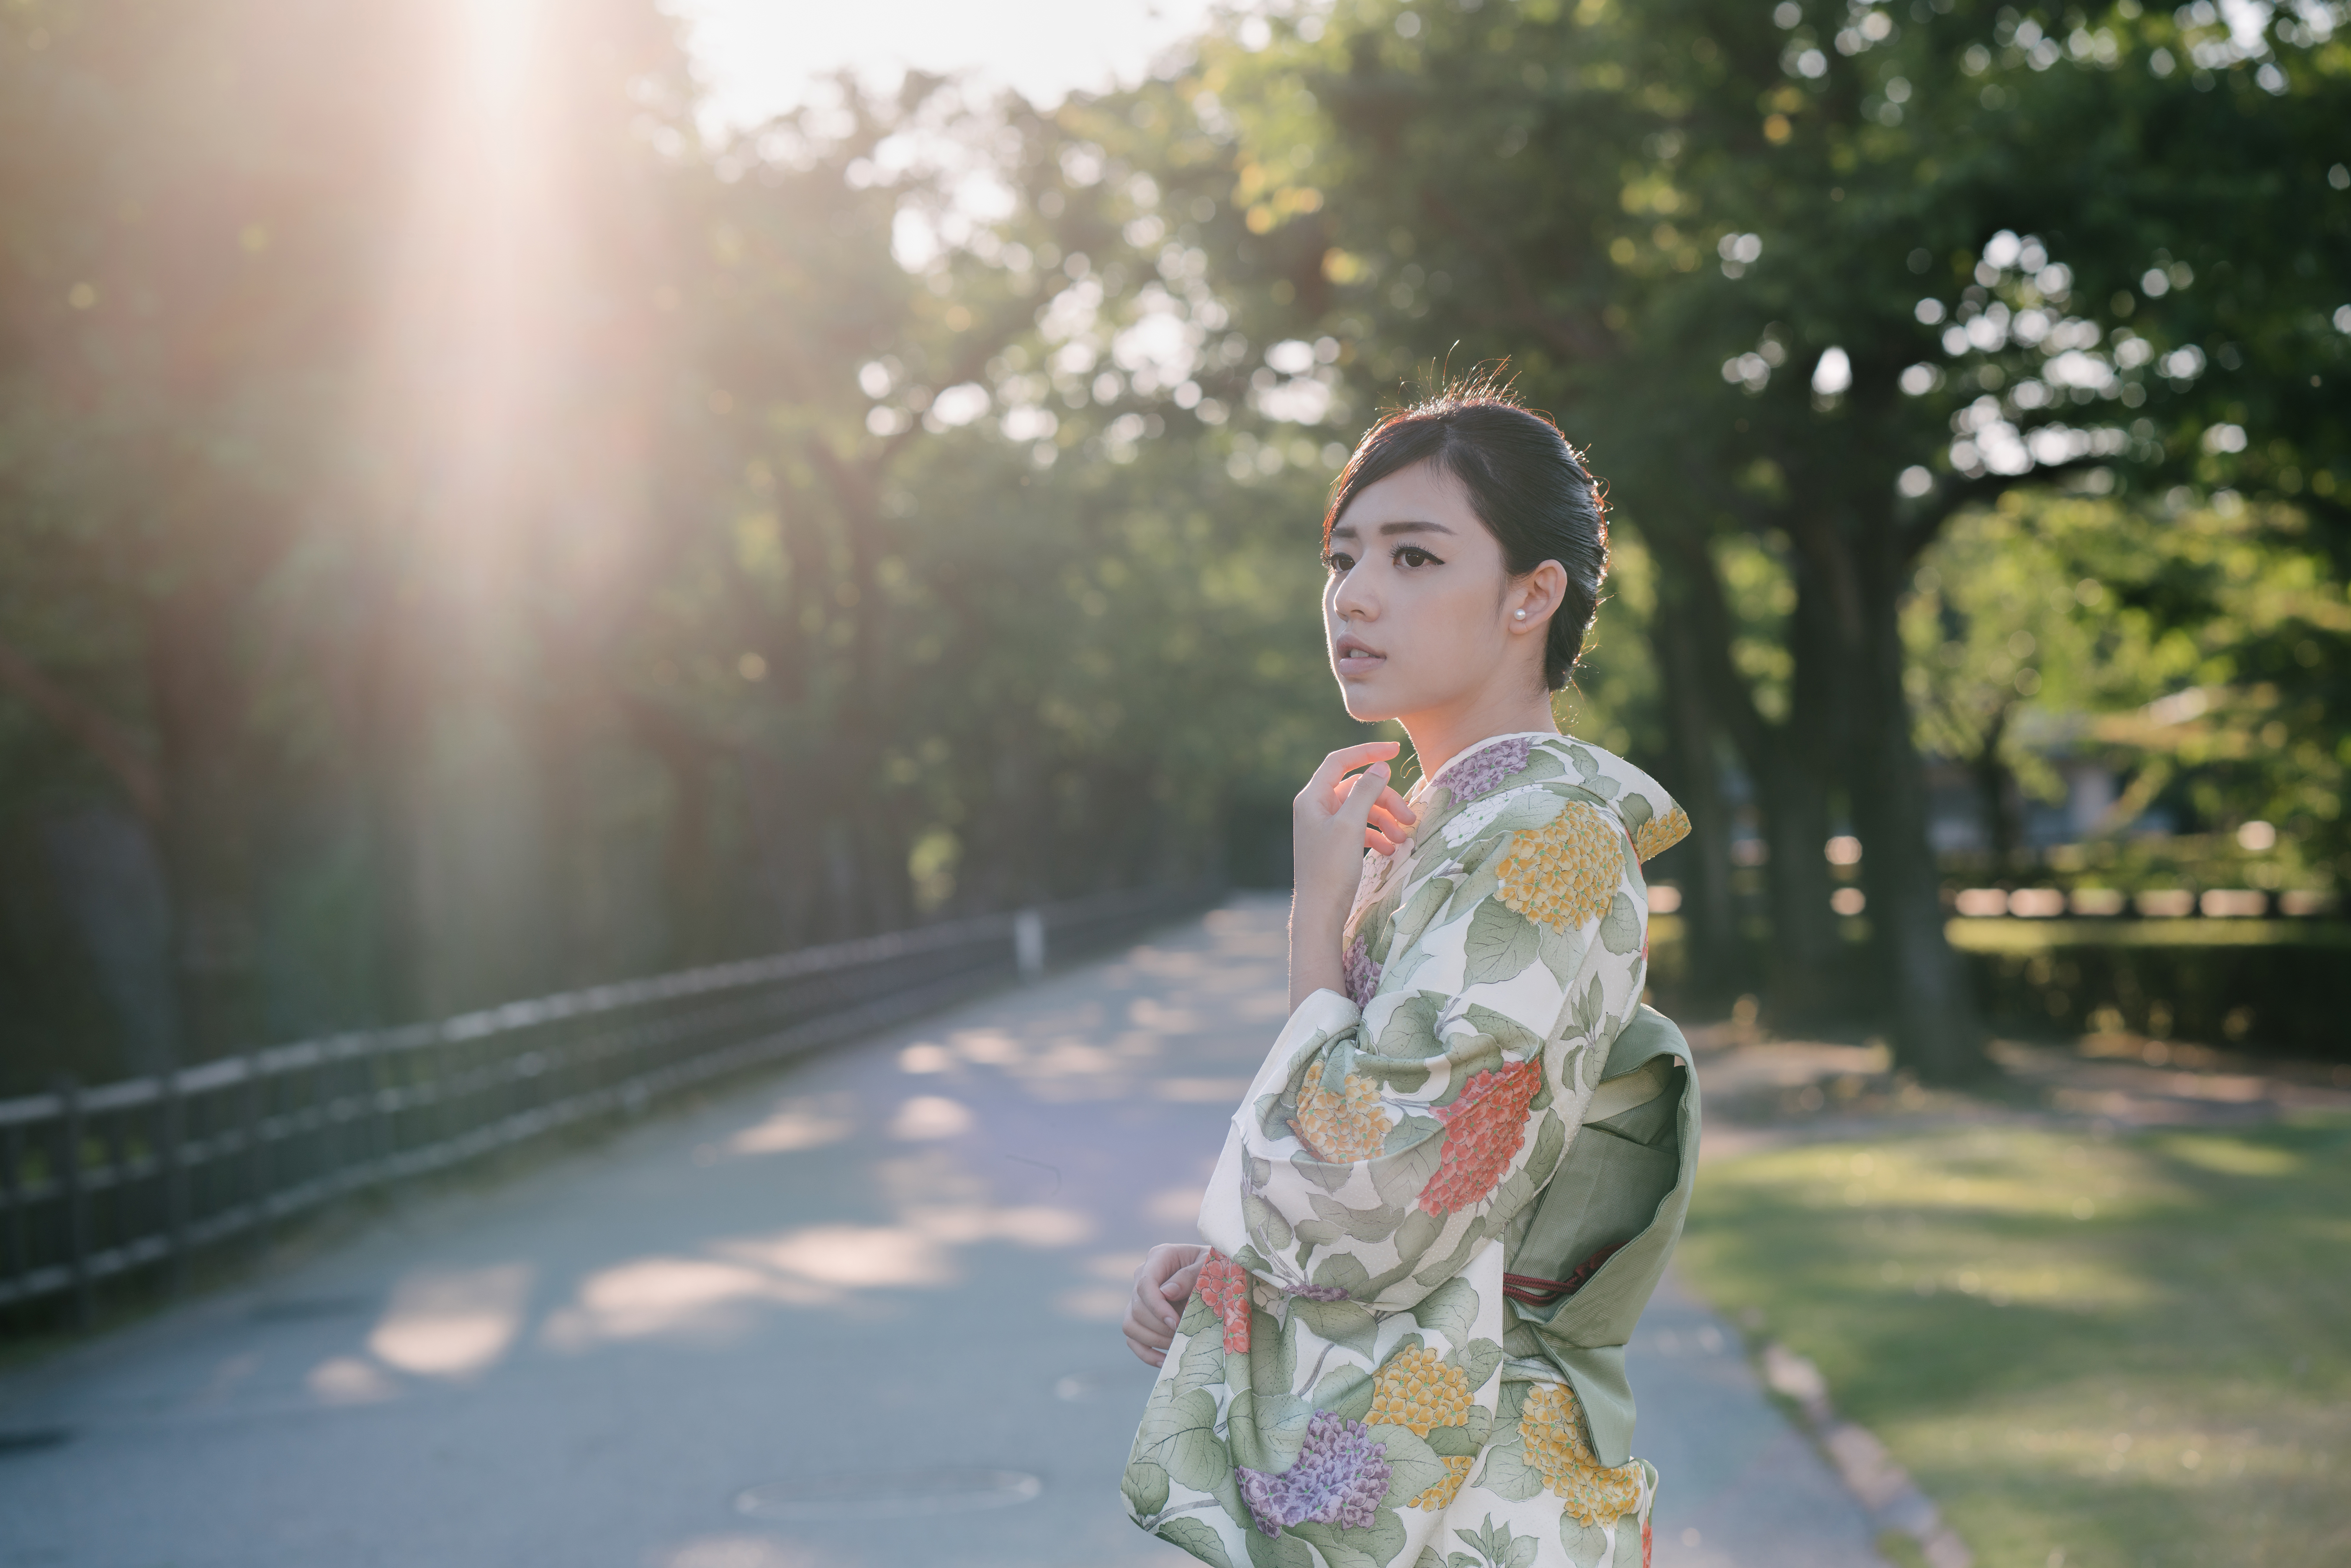 People 5616x3746 Kiki Hsieh model women brunette Asian traditional clothing looking away glare park trees women outdoors